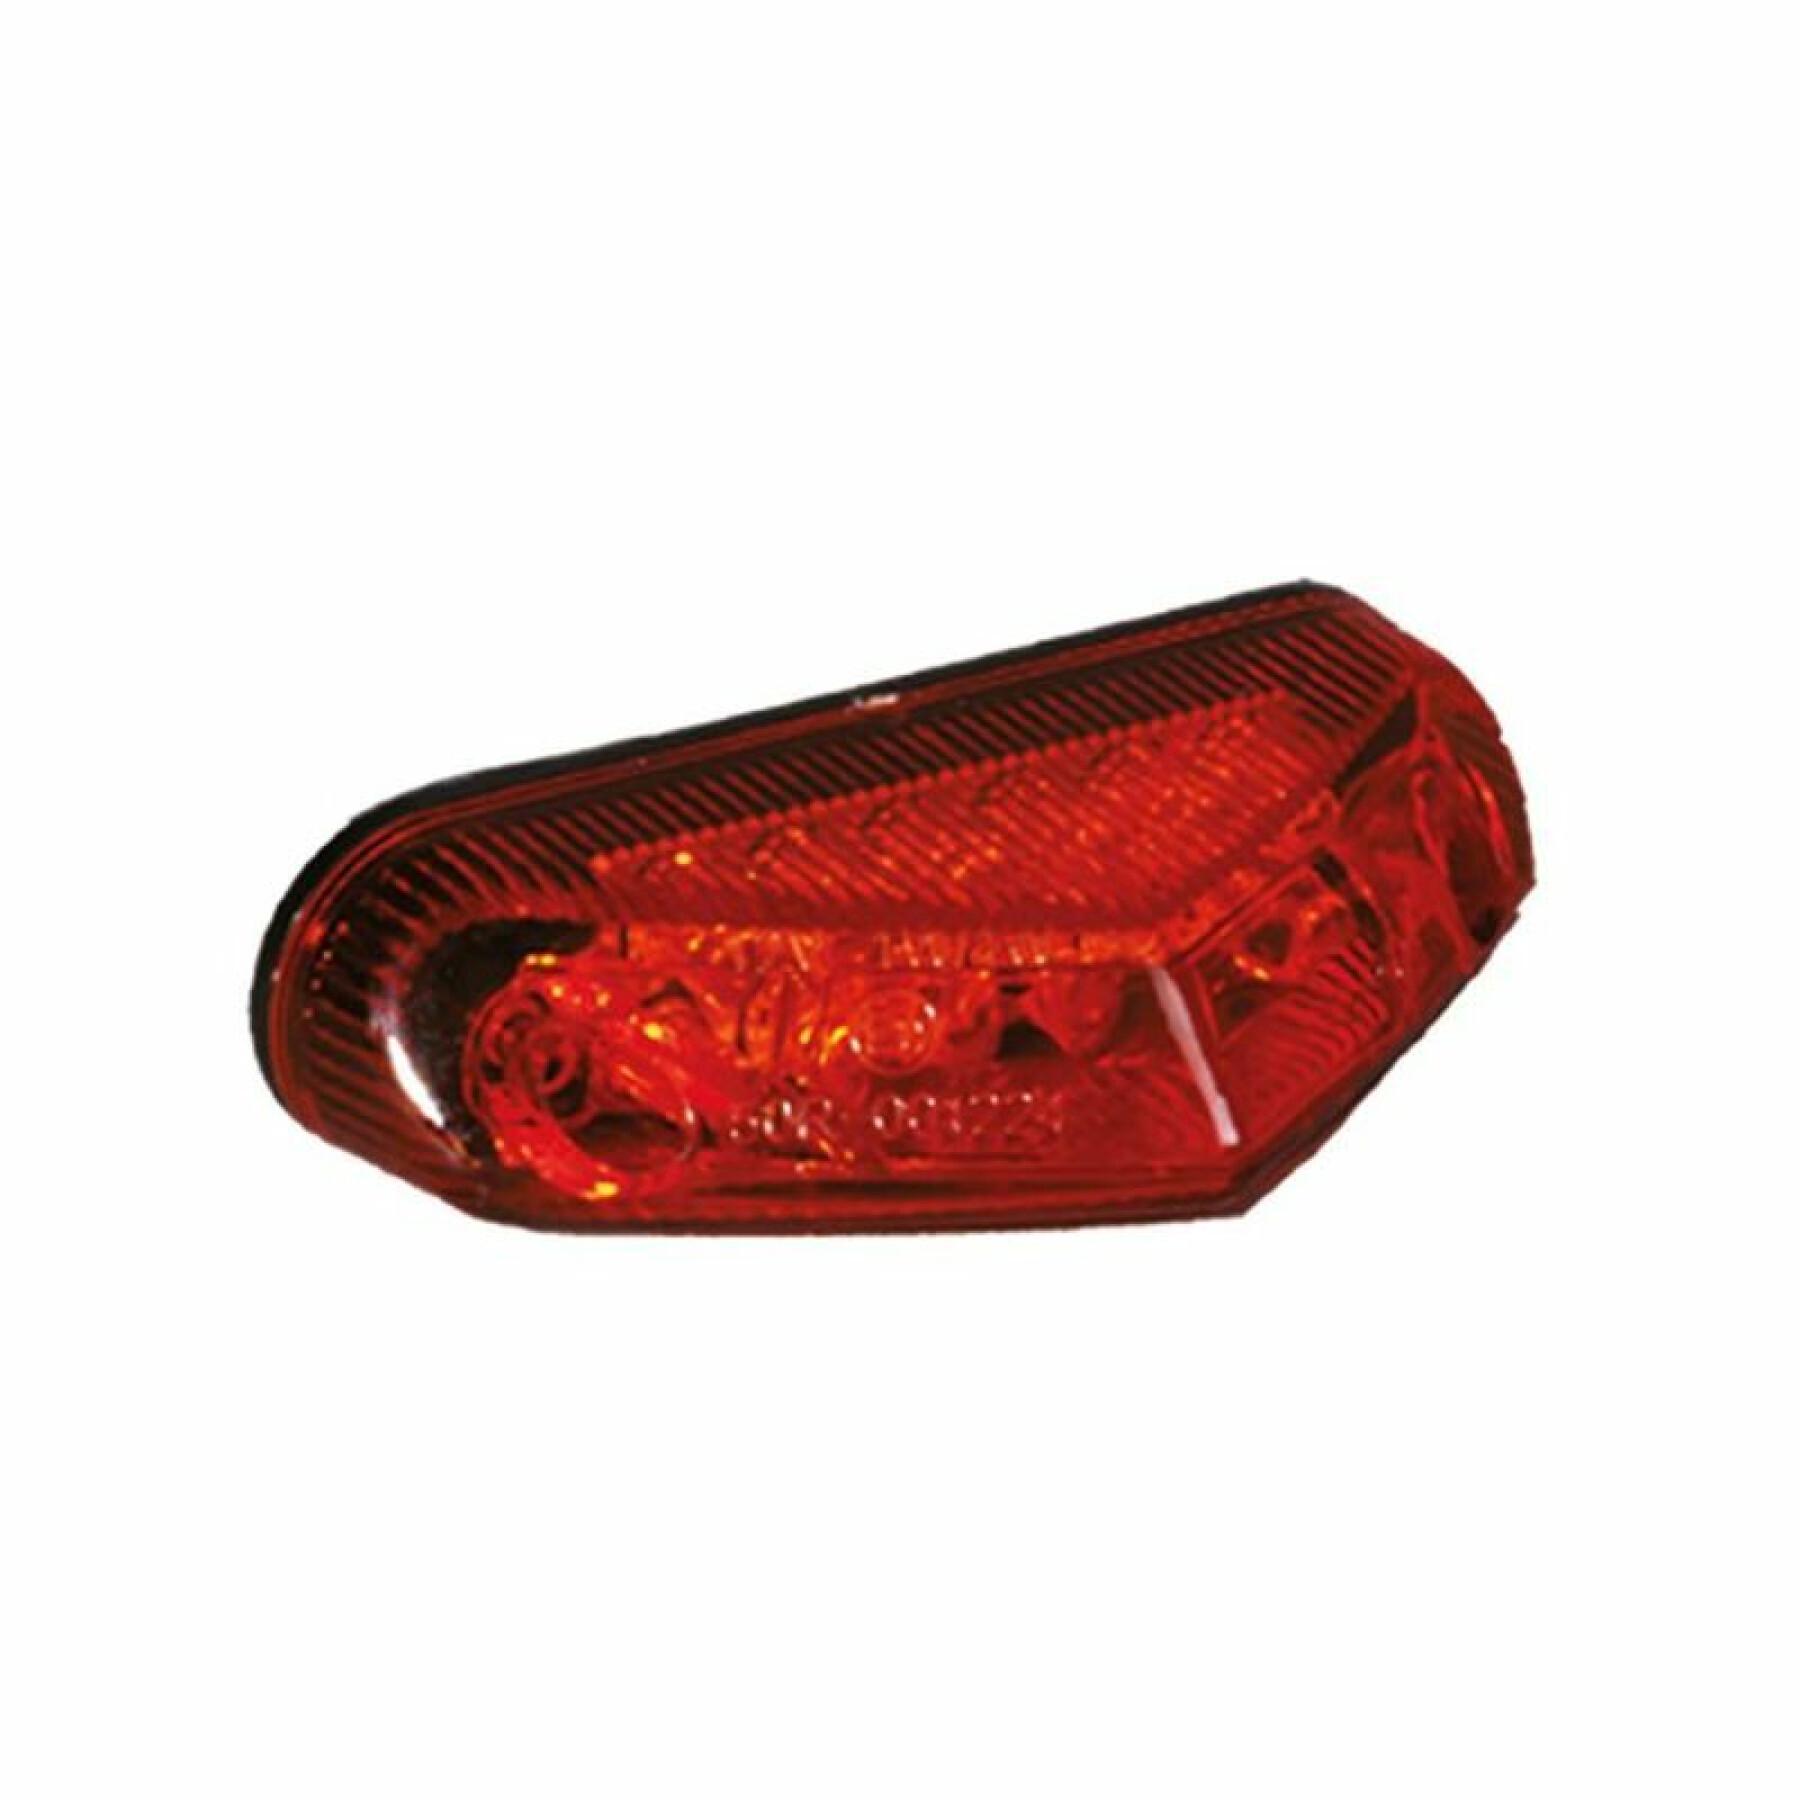 Additional motorcycle light for replacement Circuit Equipment